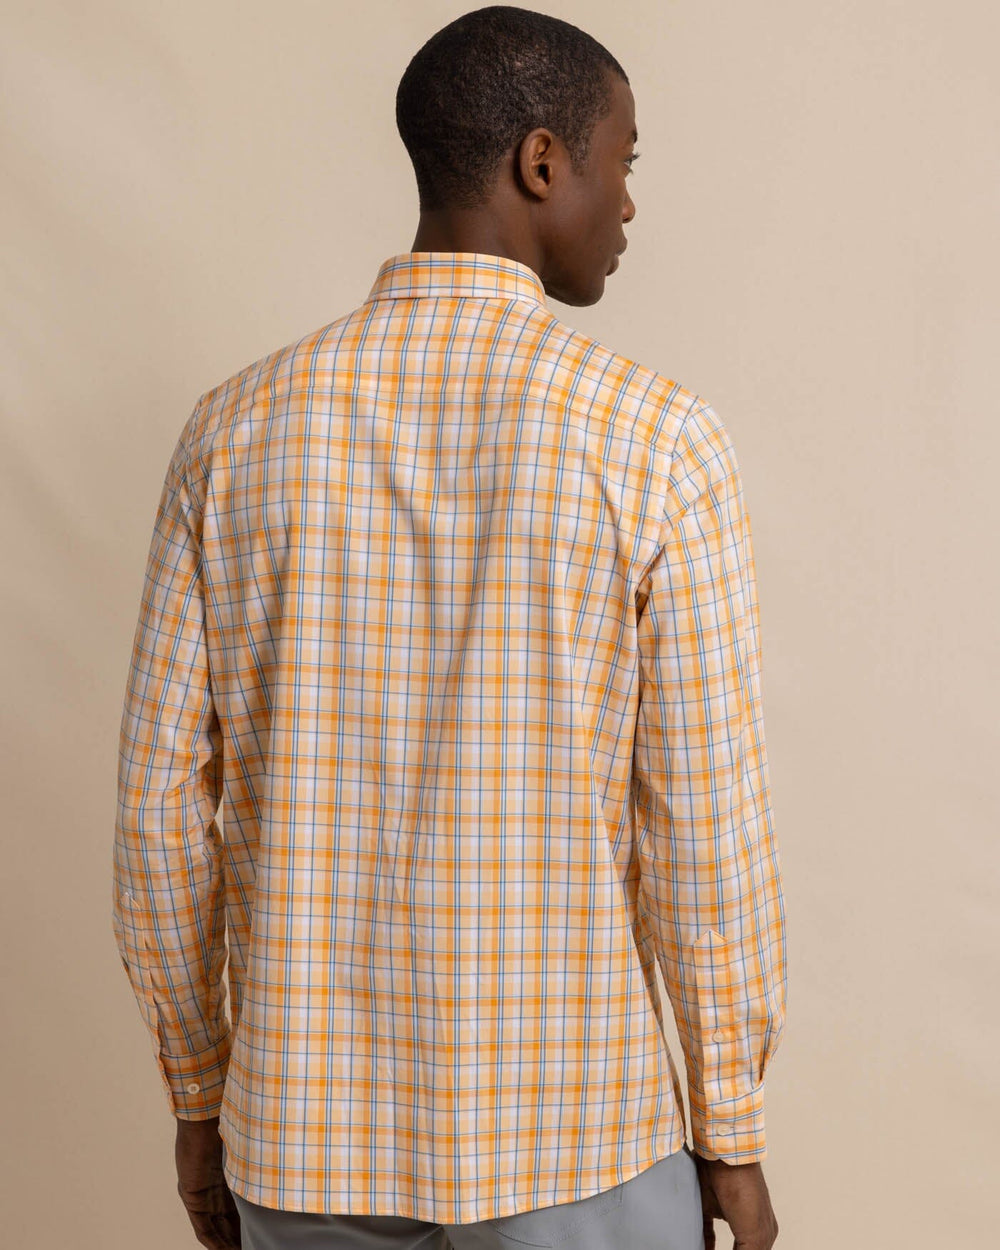 The back view of the Southern Tide brrr Whalehead Plaid Intercoastal Sport Shirt by Southern Tide - Horizon